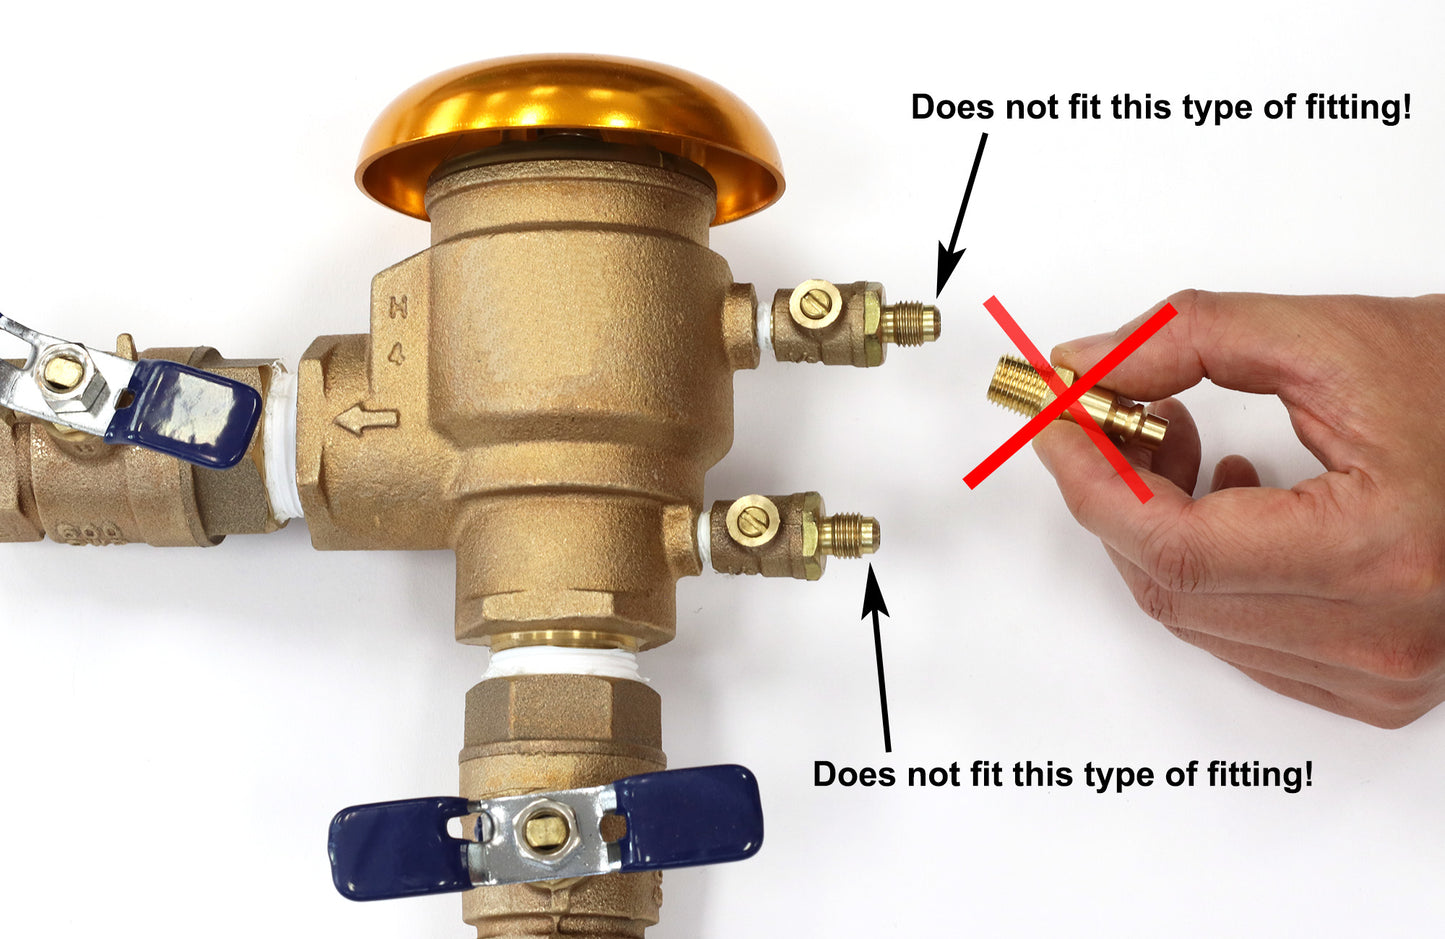 Industrial Style Plug to Male NPT Fittings | Adapters to Winterize Blow out Backflow Preventer and Pressure Vacuum Breaker (PVB) for Sprinkler System (Solid Lead-Free Brass)